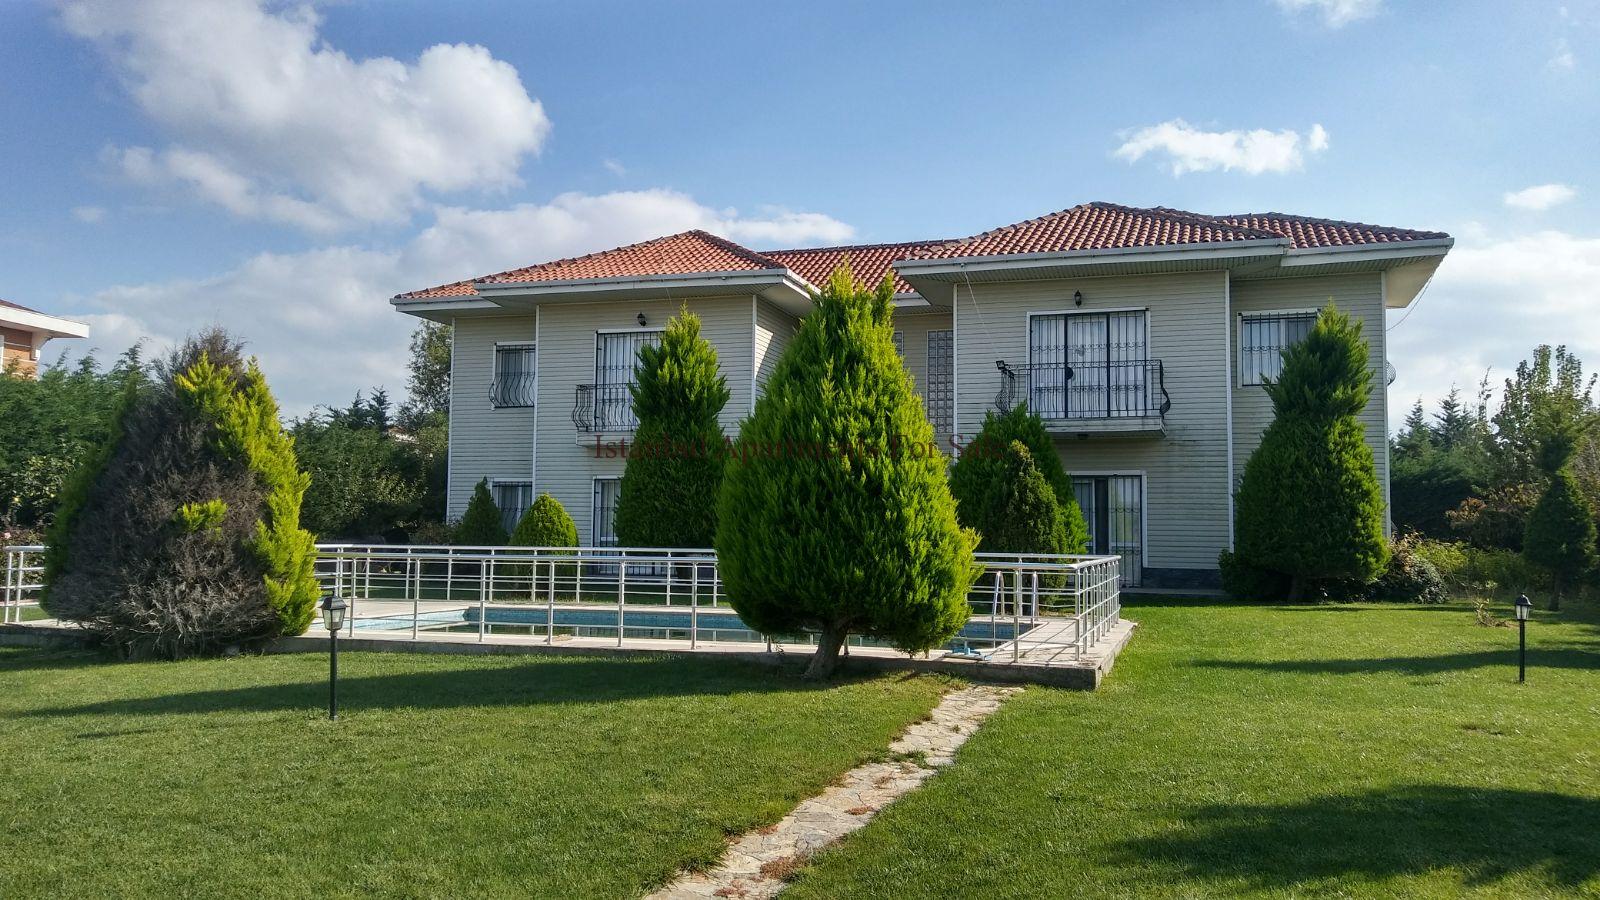 Istanbul Apartments For Sale in Turkey Istanbul Luxury Villa For Sale with Private Swimming Pool  